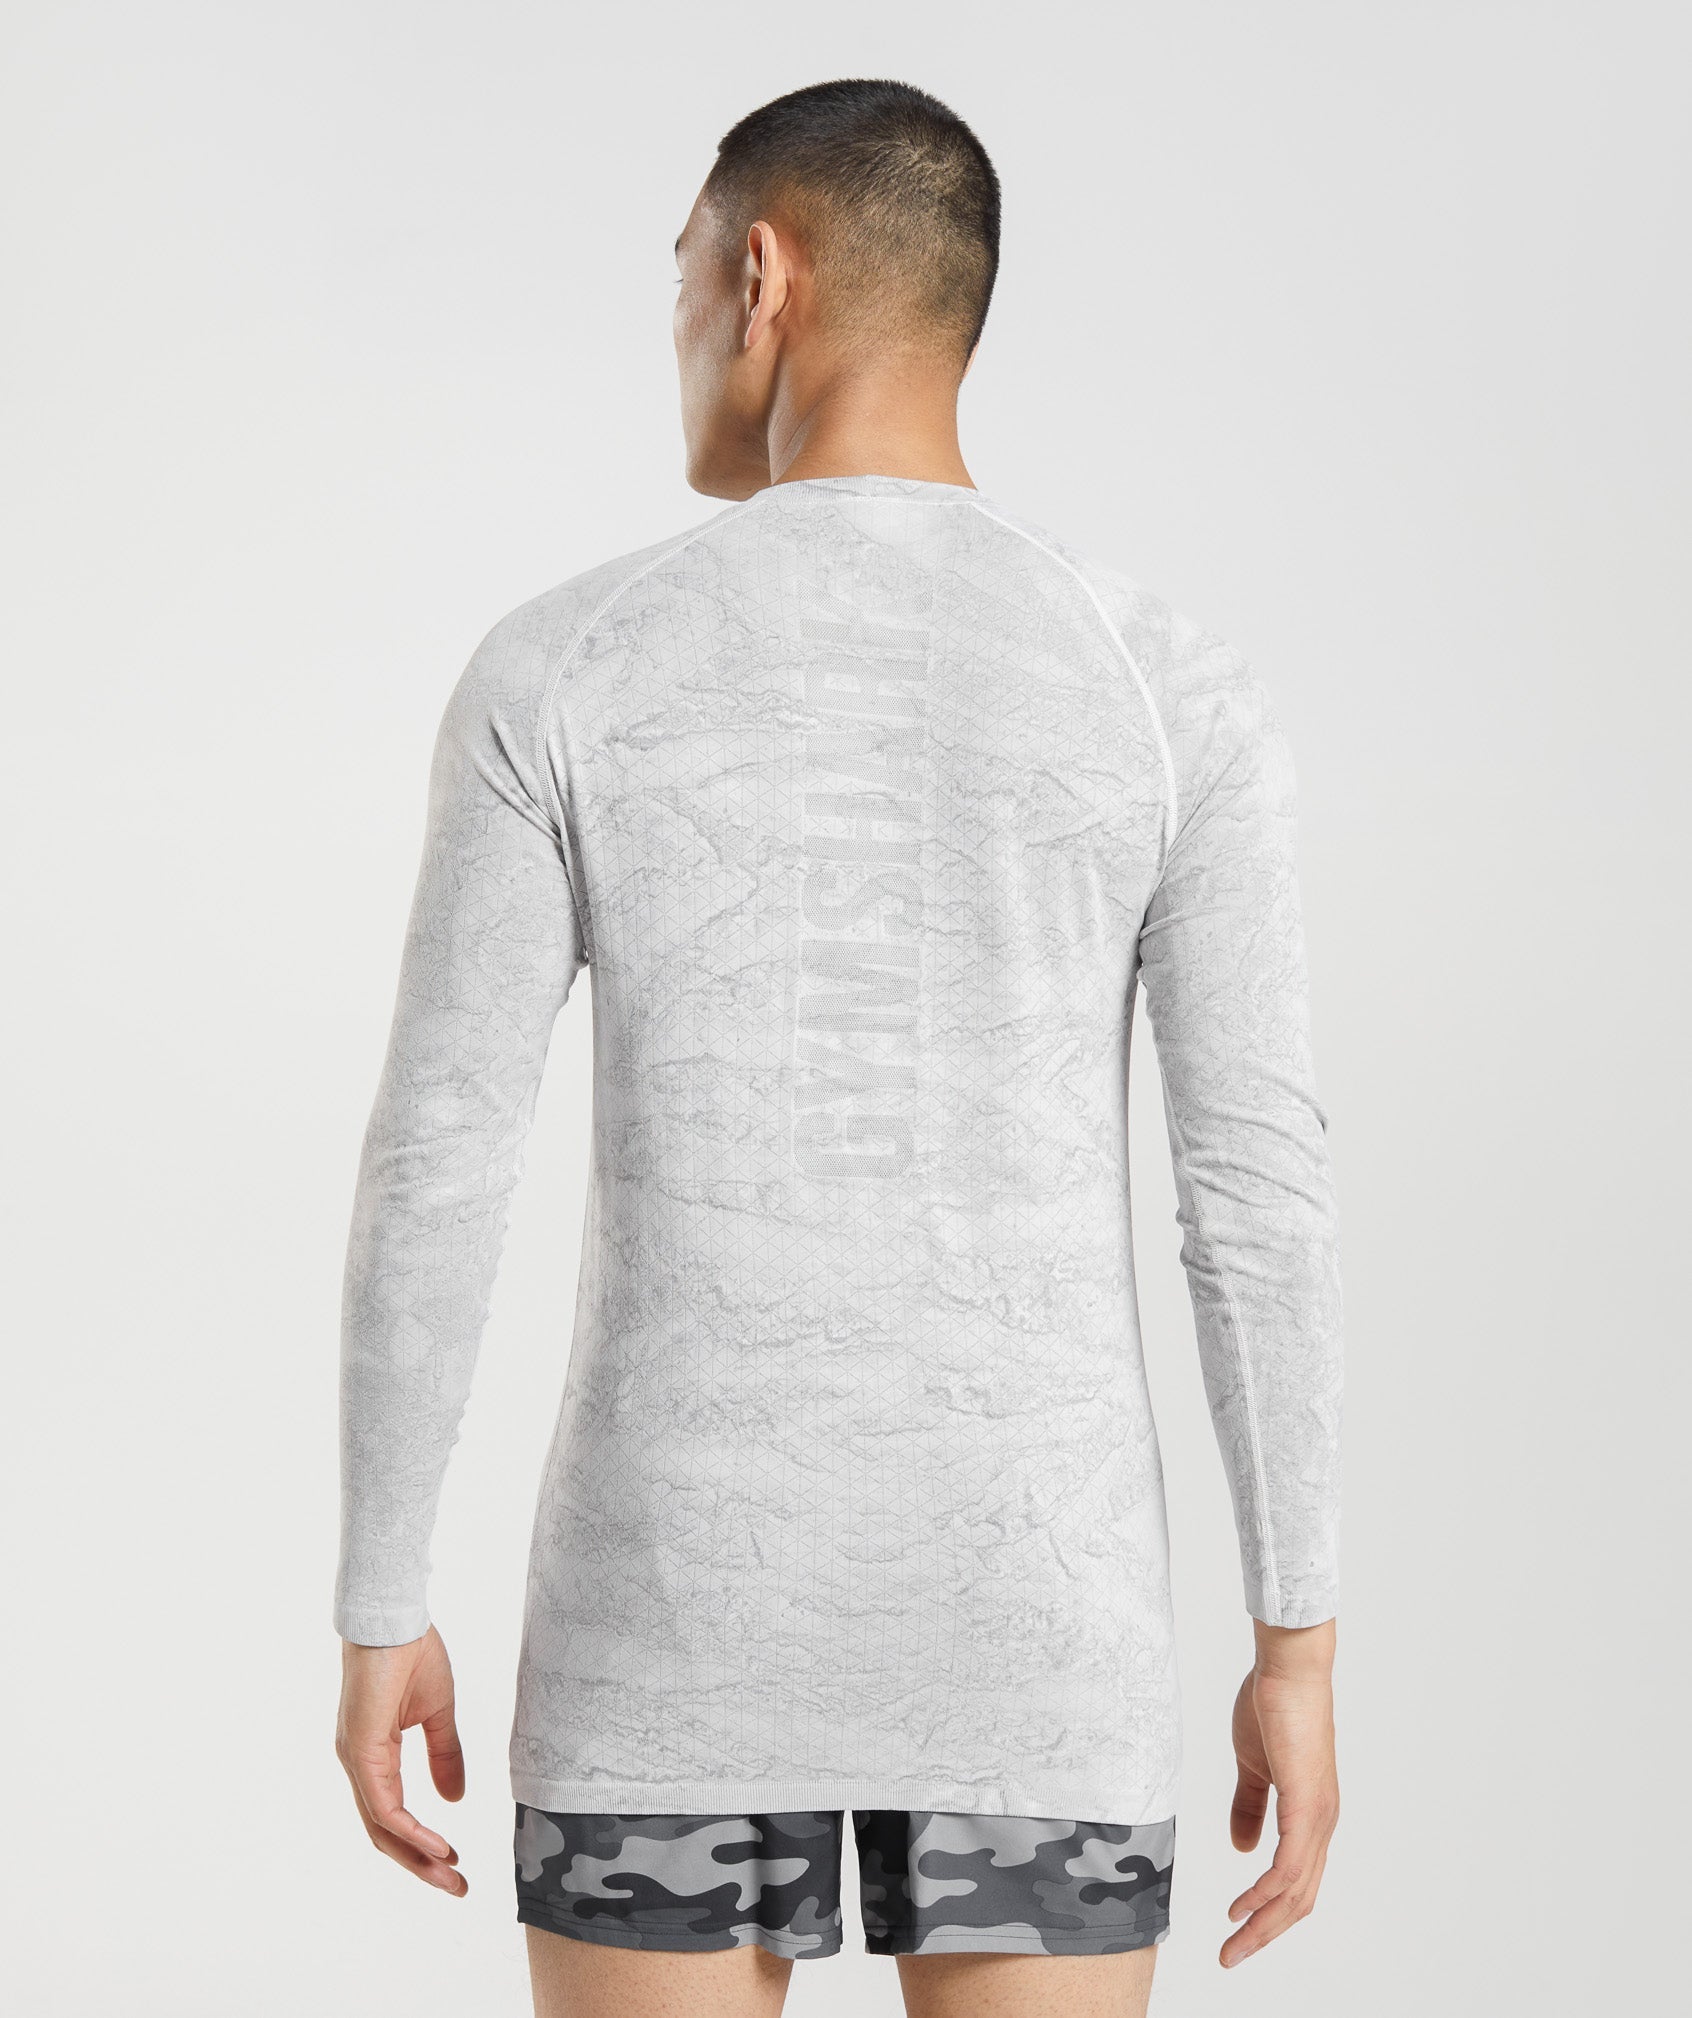 Geo Seamless Long Sleeve T-Shirt in Off White/Light Grey - view 2